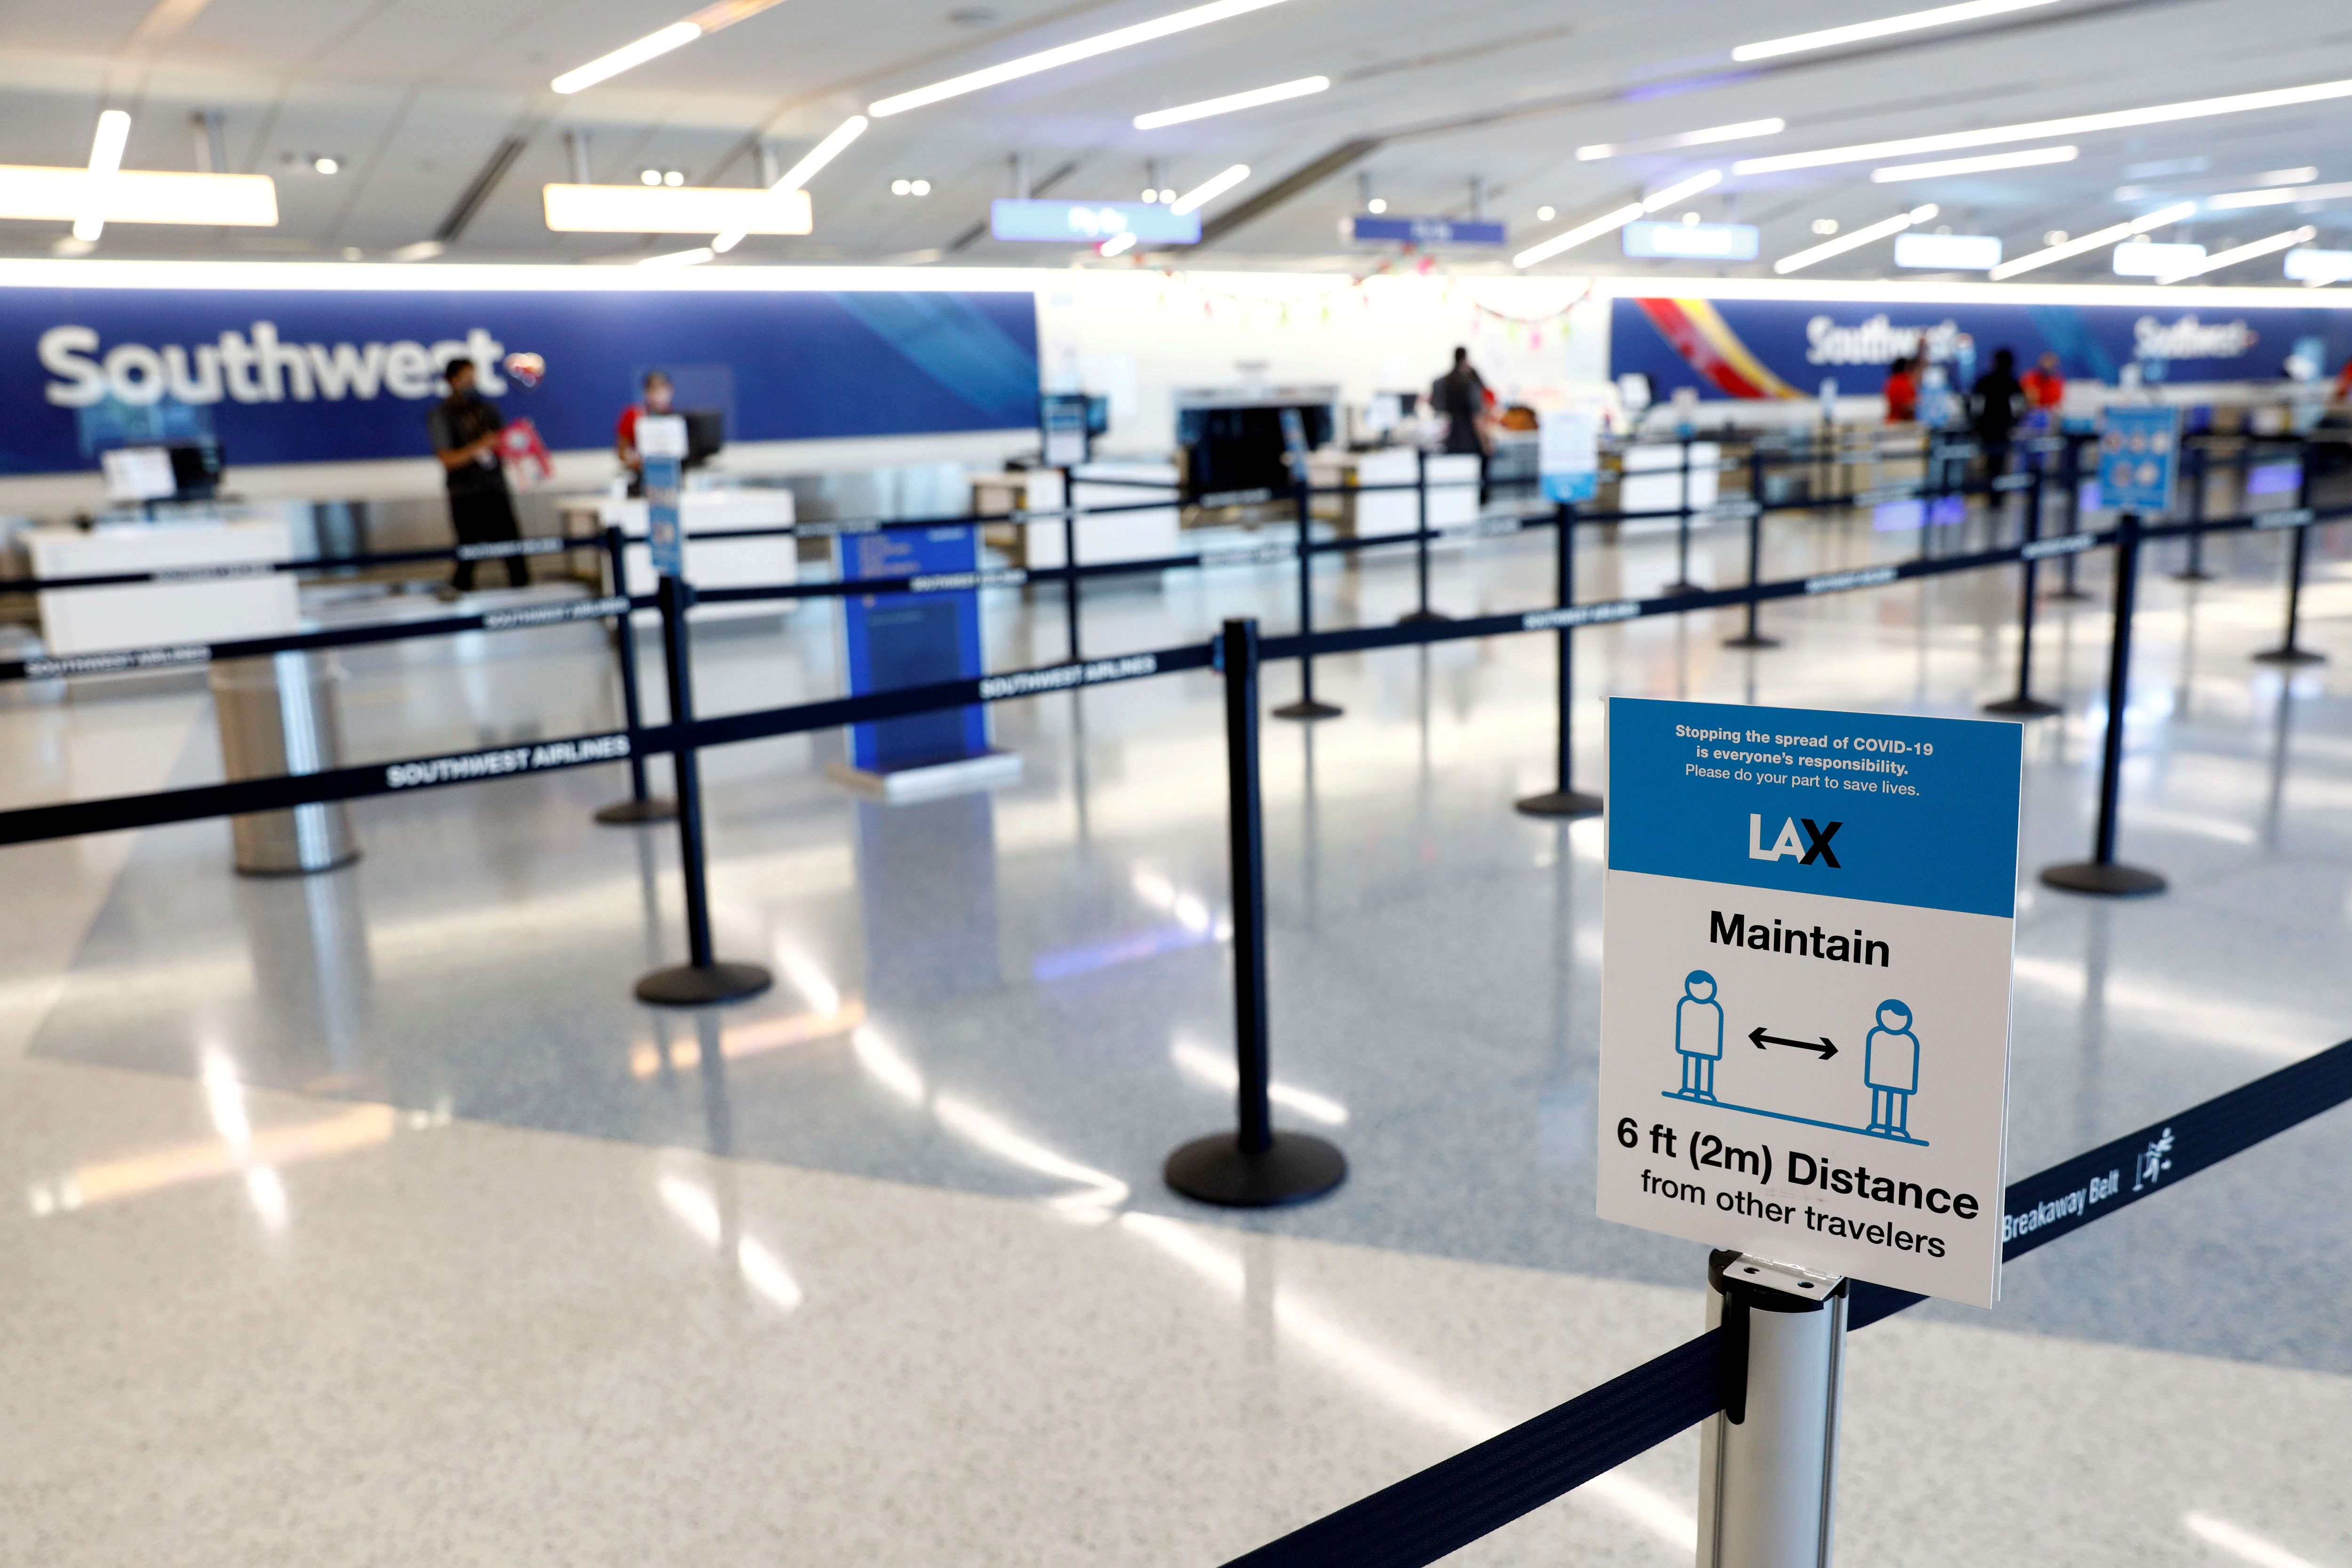 Social distancing sign is displayed at a check-in area for Southwest Airlines Co. at Los Angeles International Airport (LAX) on an unusually empty Memorial Day weekend during the outbreak of the coronavirus disease (COVID-19) in Los Angeles